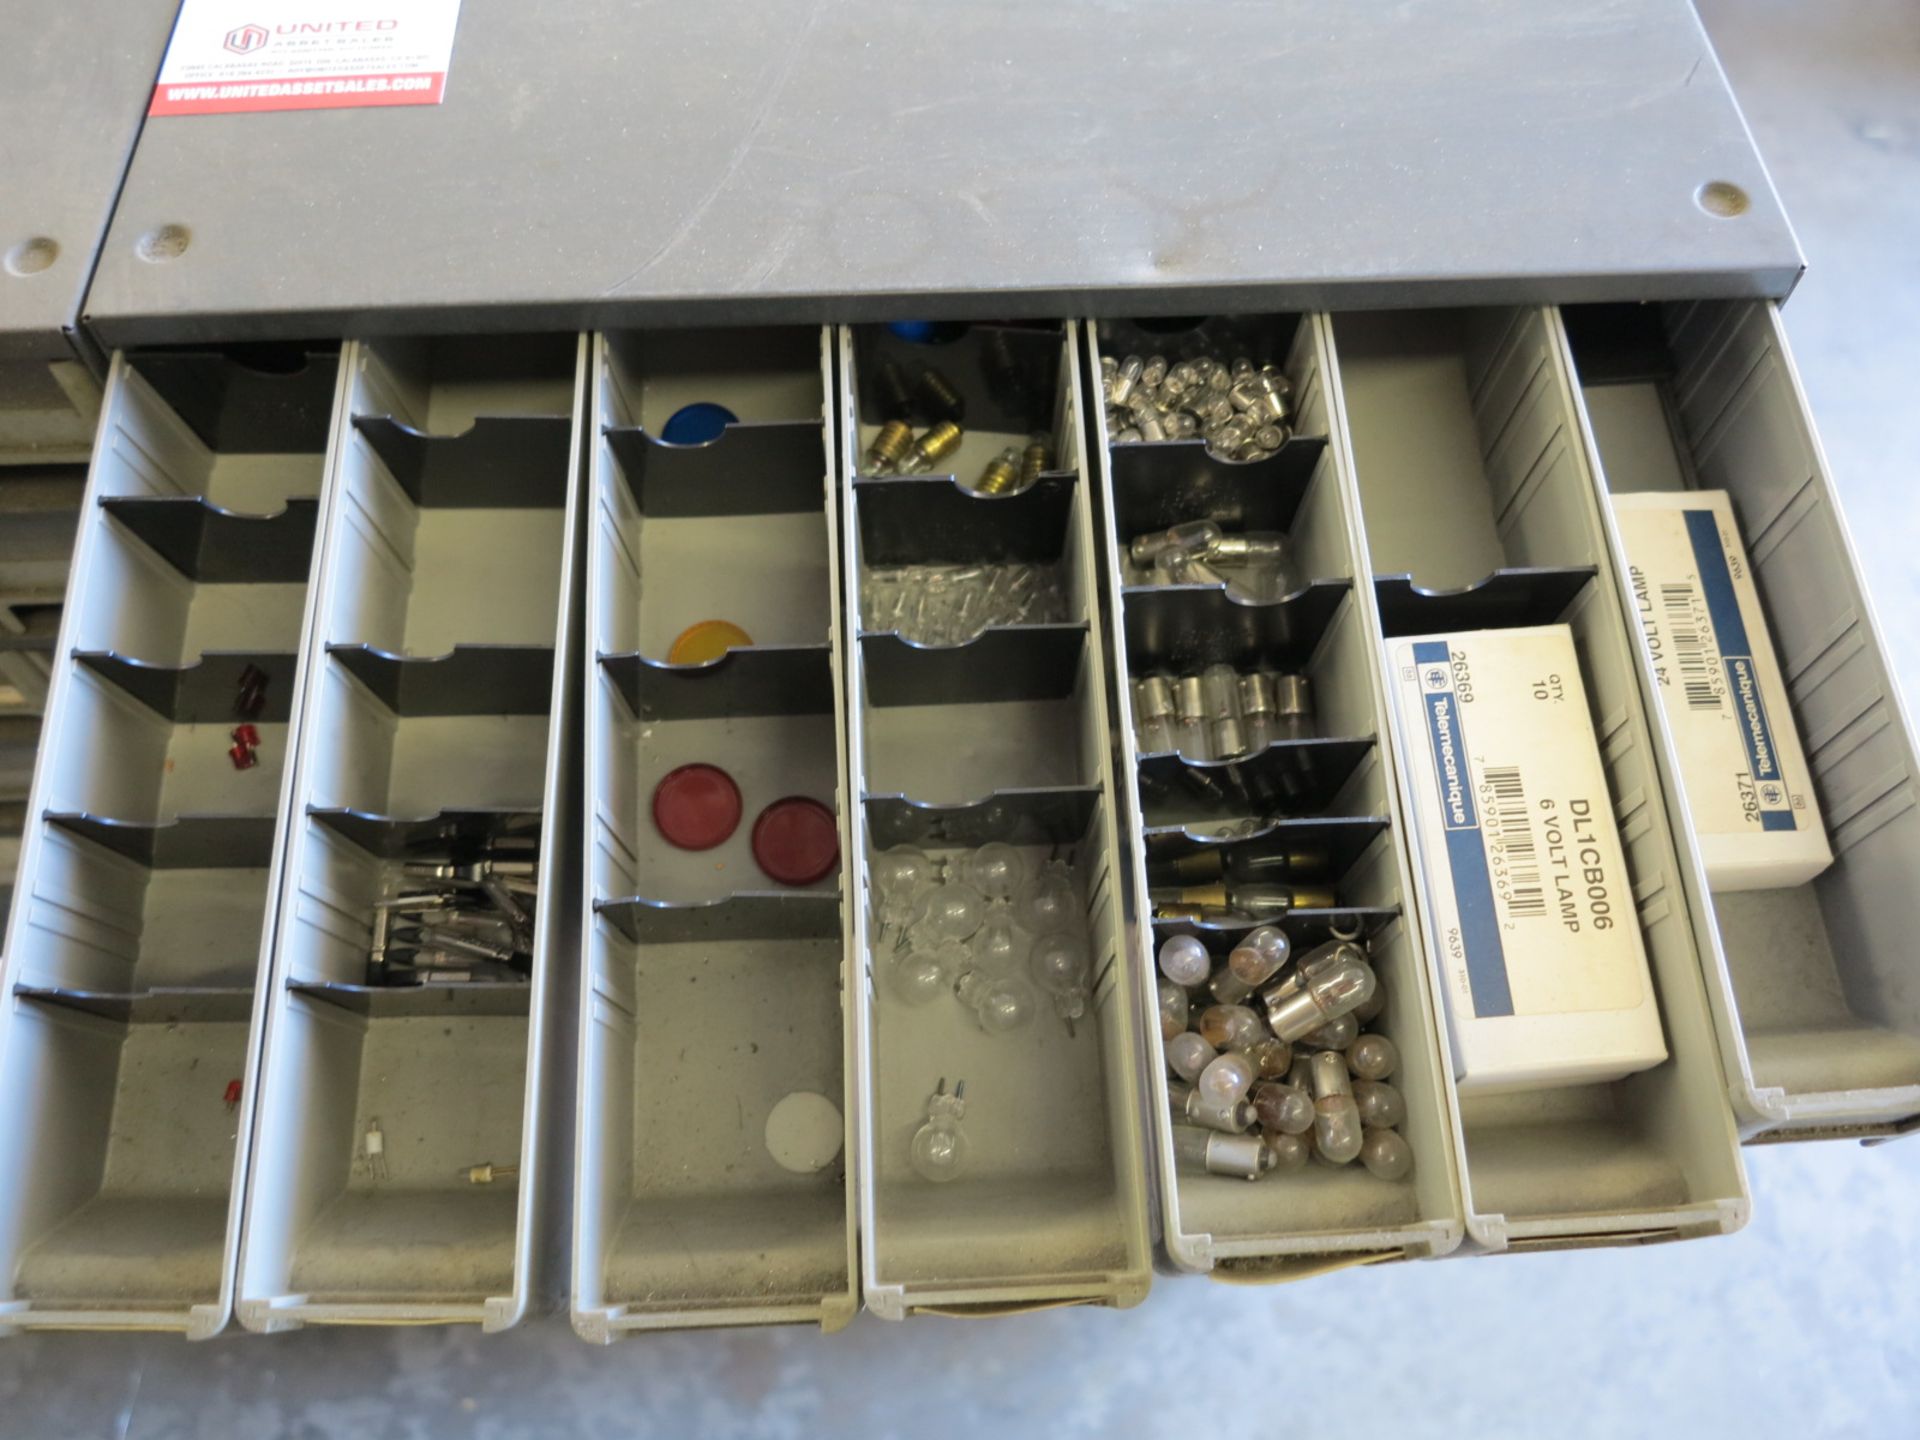 28-DRAWER PARTS BIN, W/ CONTENTS: ELECTRONIC PARTS - Image 2 of 3